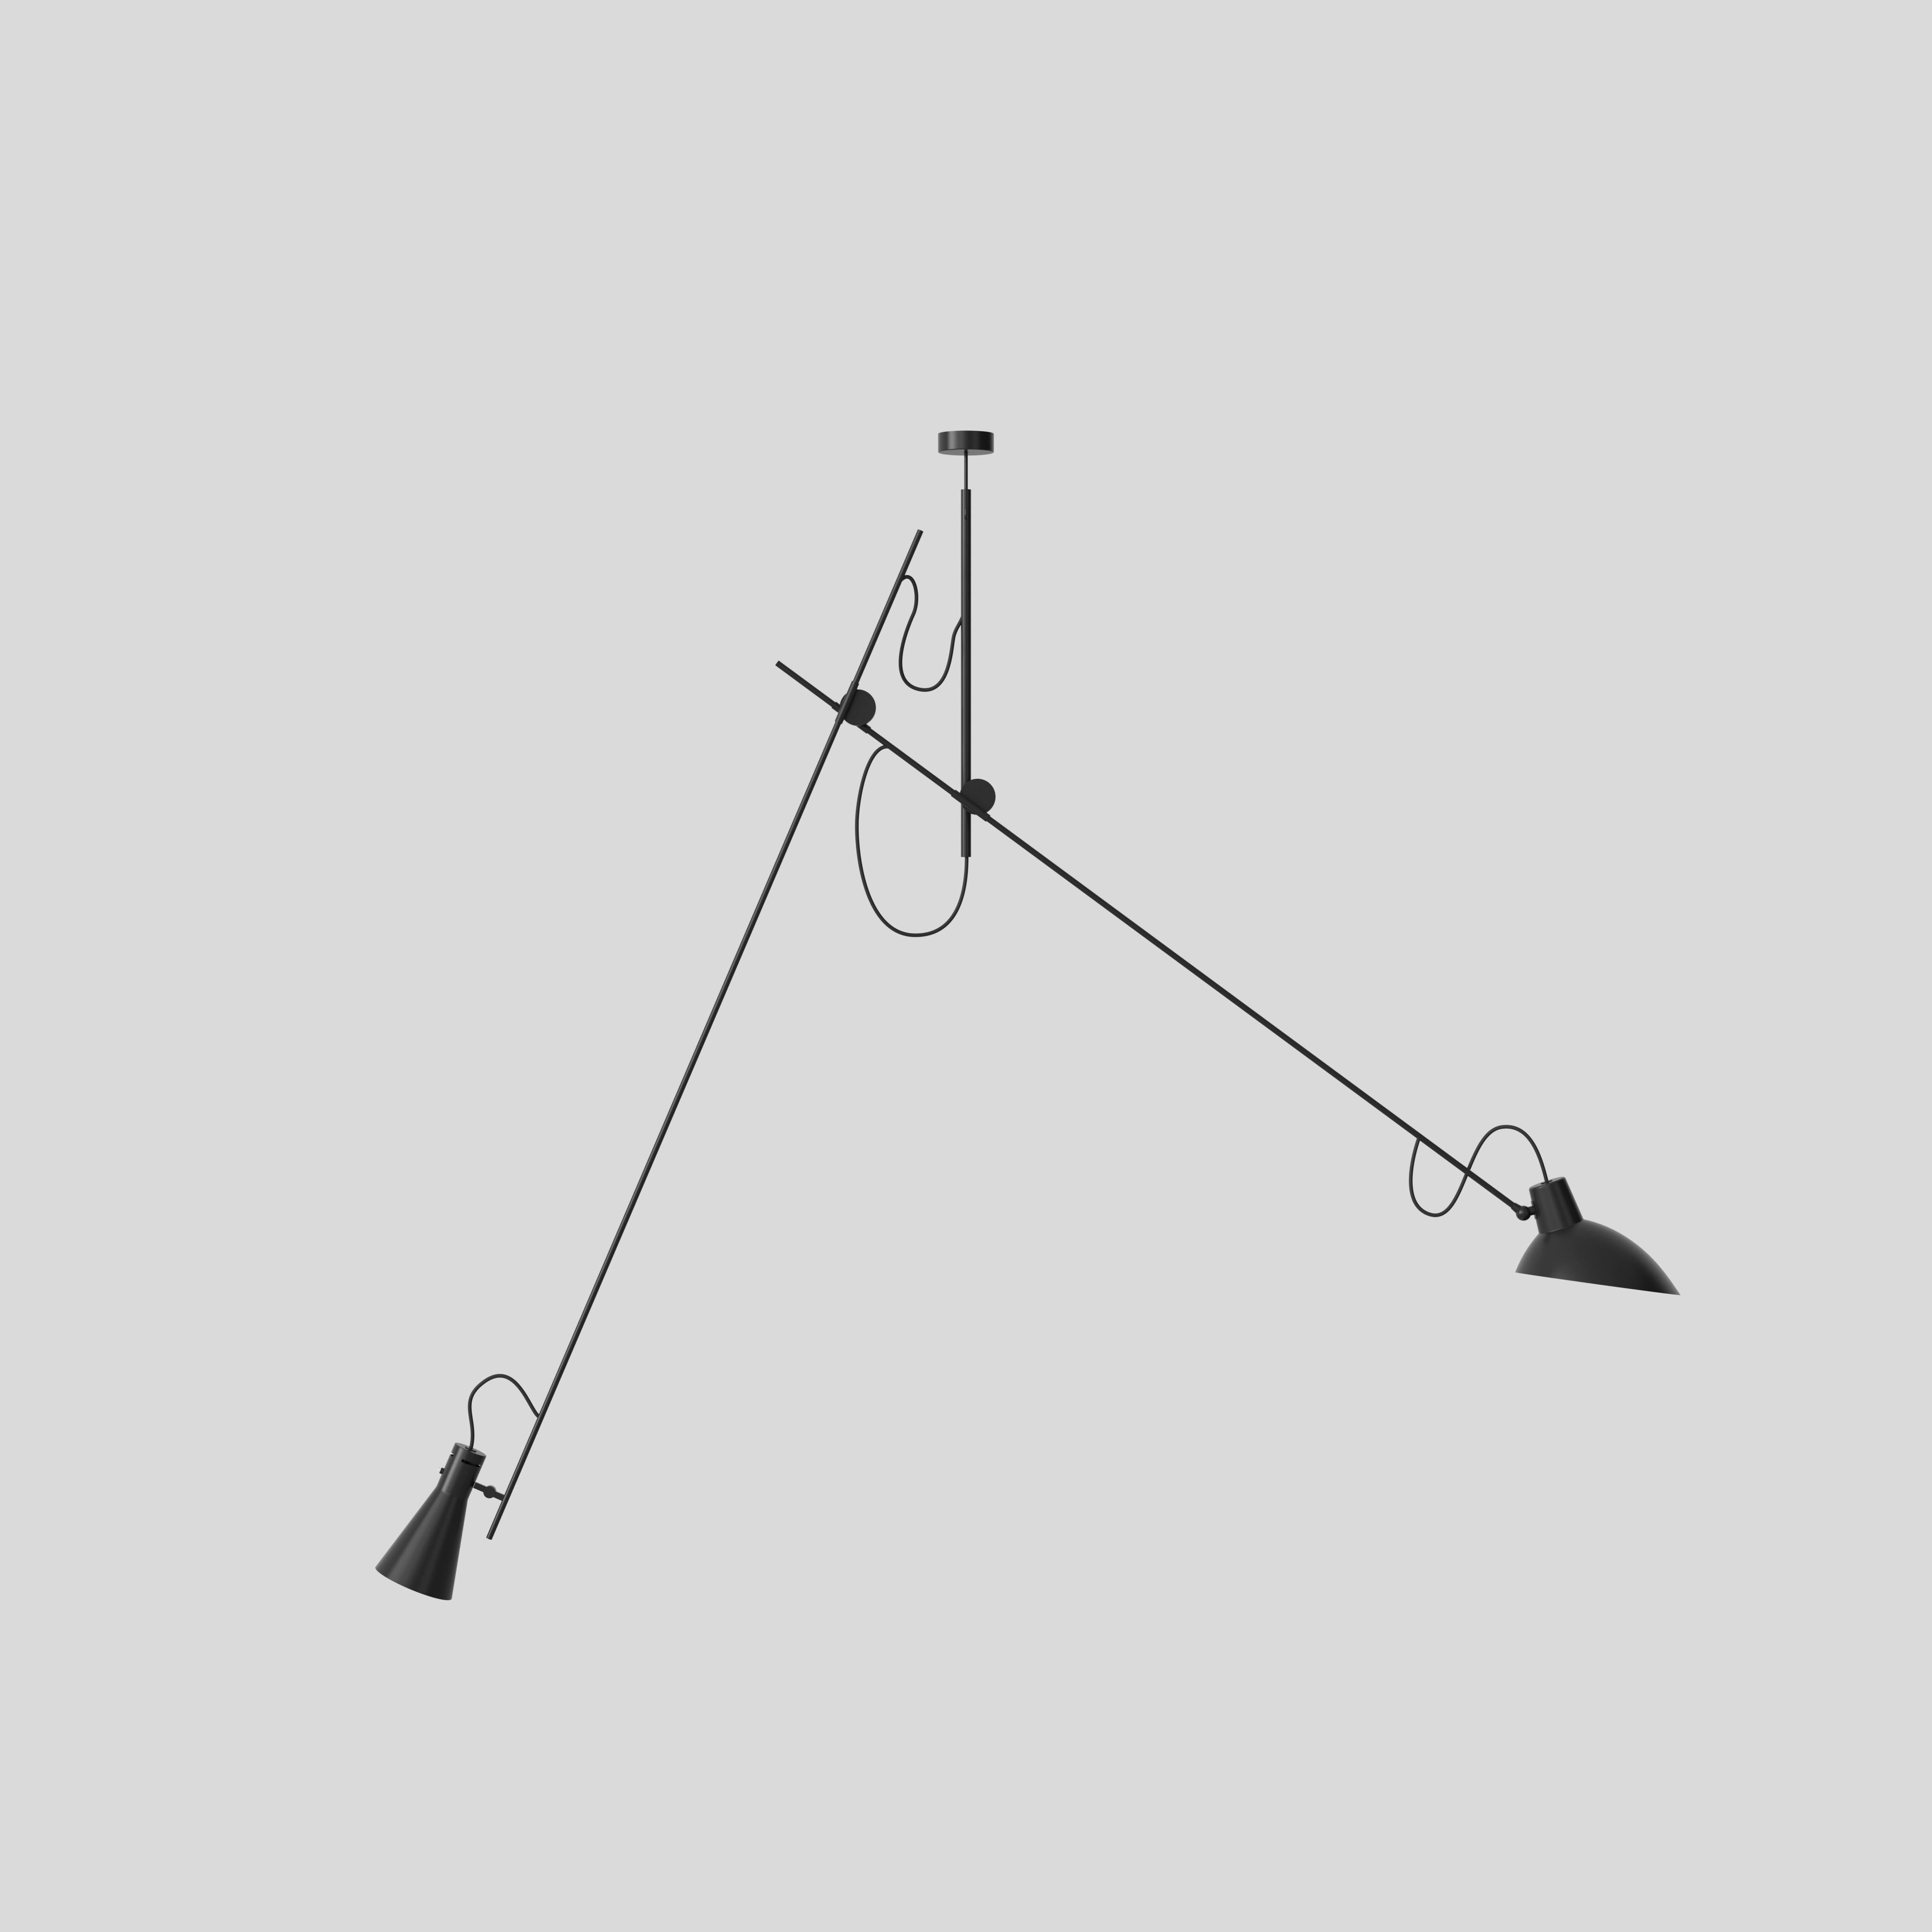 VV Cinquanta suspension lamp
Design by Vittoriano Viganò
This version is with black lacquered reflectors and black frame.

The VV Cinquanta suspension is elegant and versatile with two posable direct light sources.

With a distinctive dual-stemmed